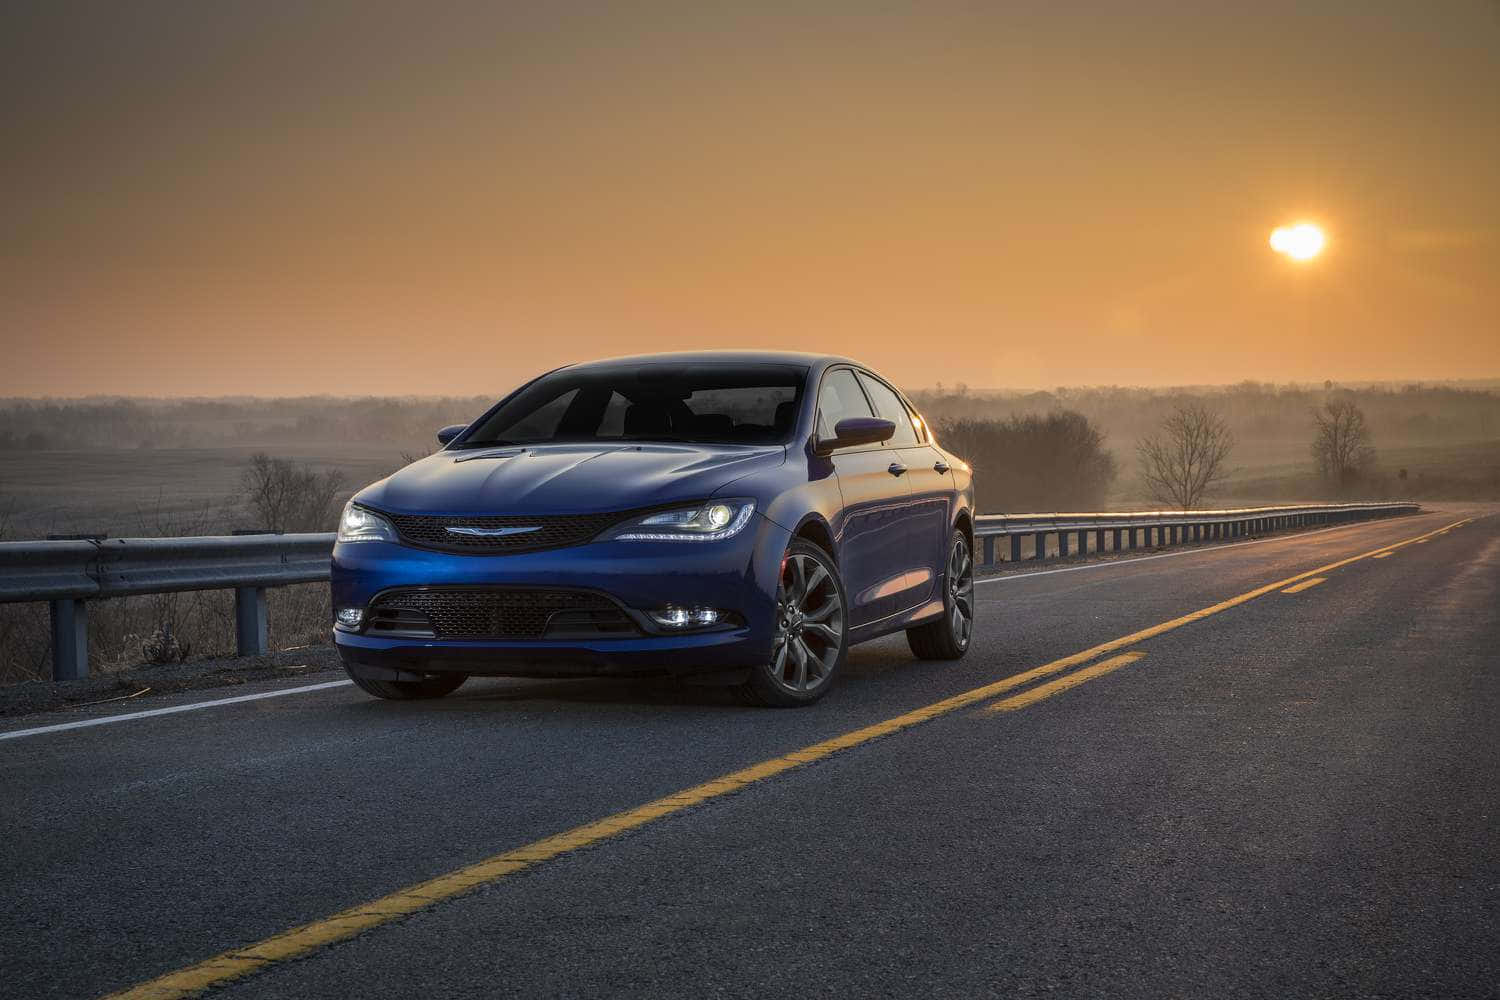 From bold and powerful to sleek and sophisticated, the Chrysler line of cars is sure to fit any lifestyle.